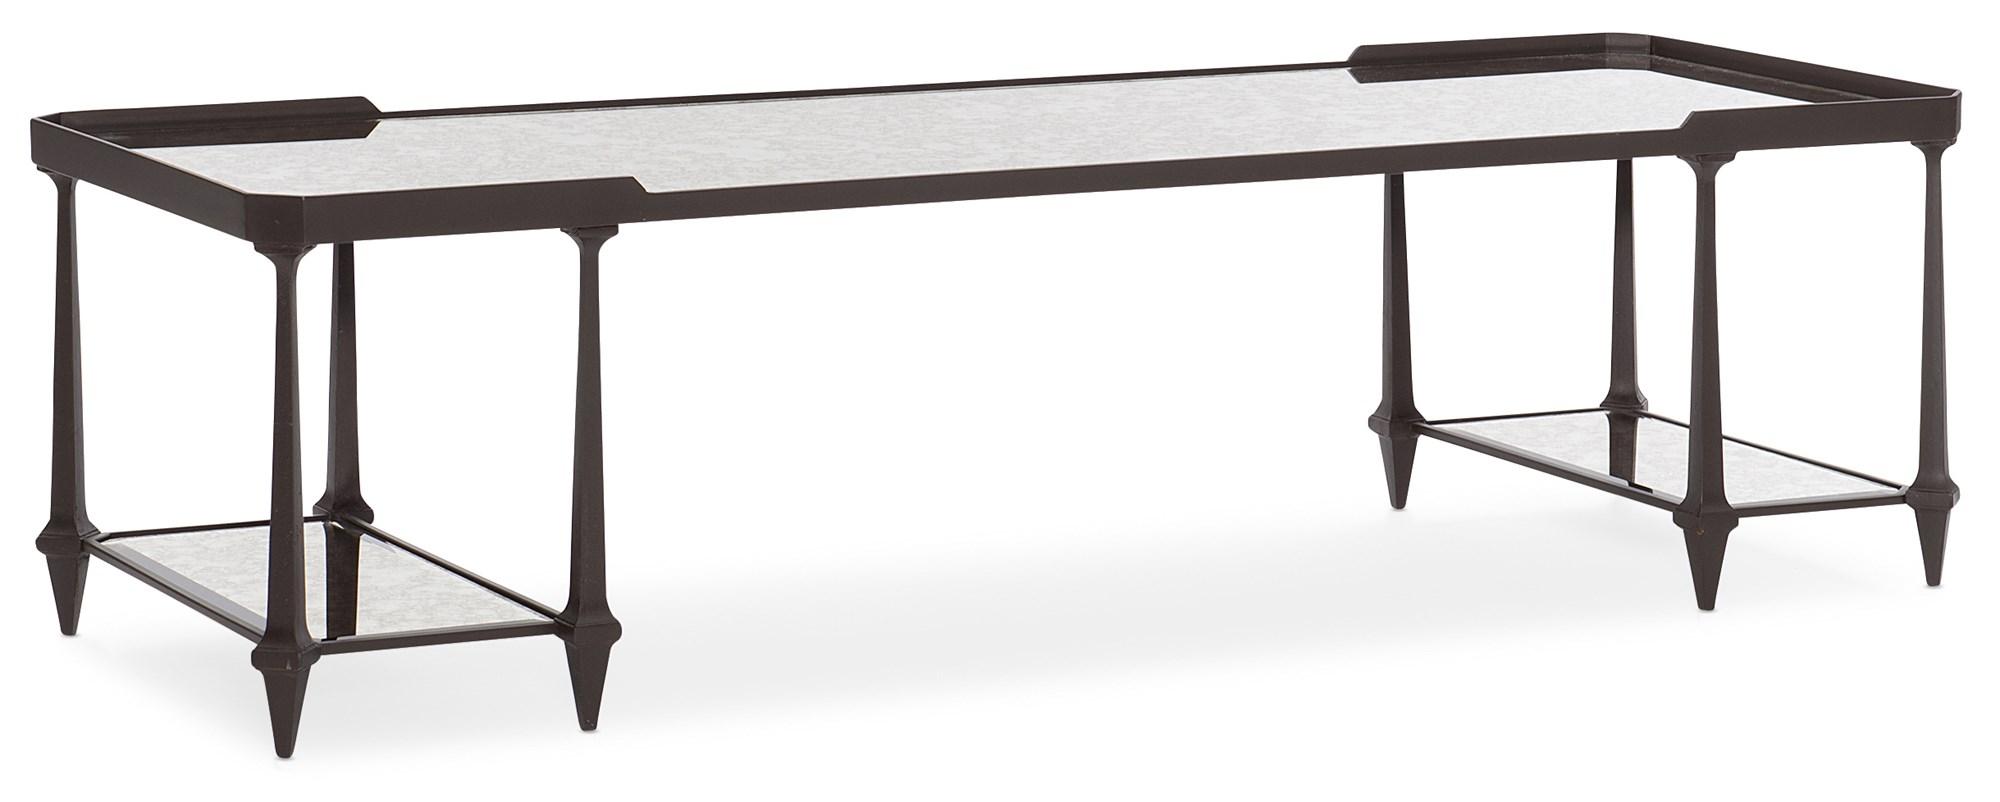 Contemporary Coffee Tables BE ALL CLA-019-407 in Chocolate 